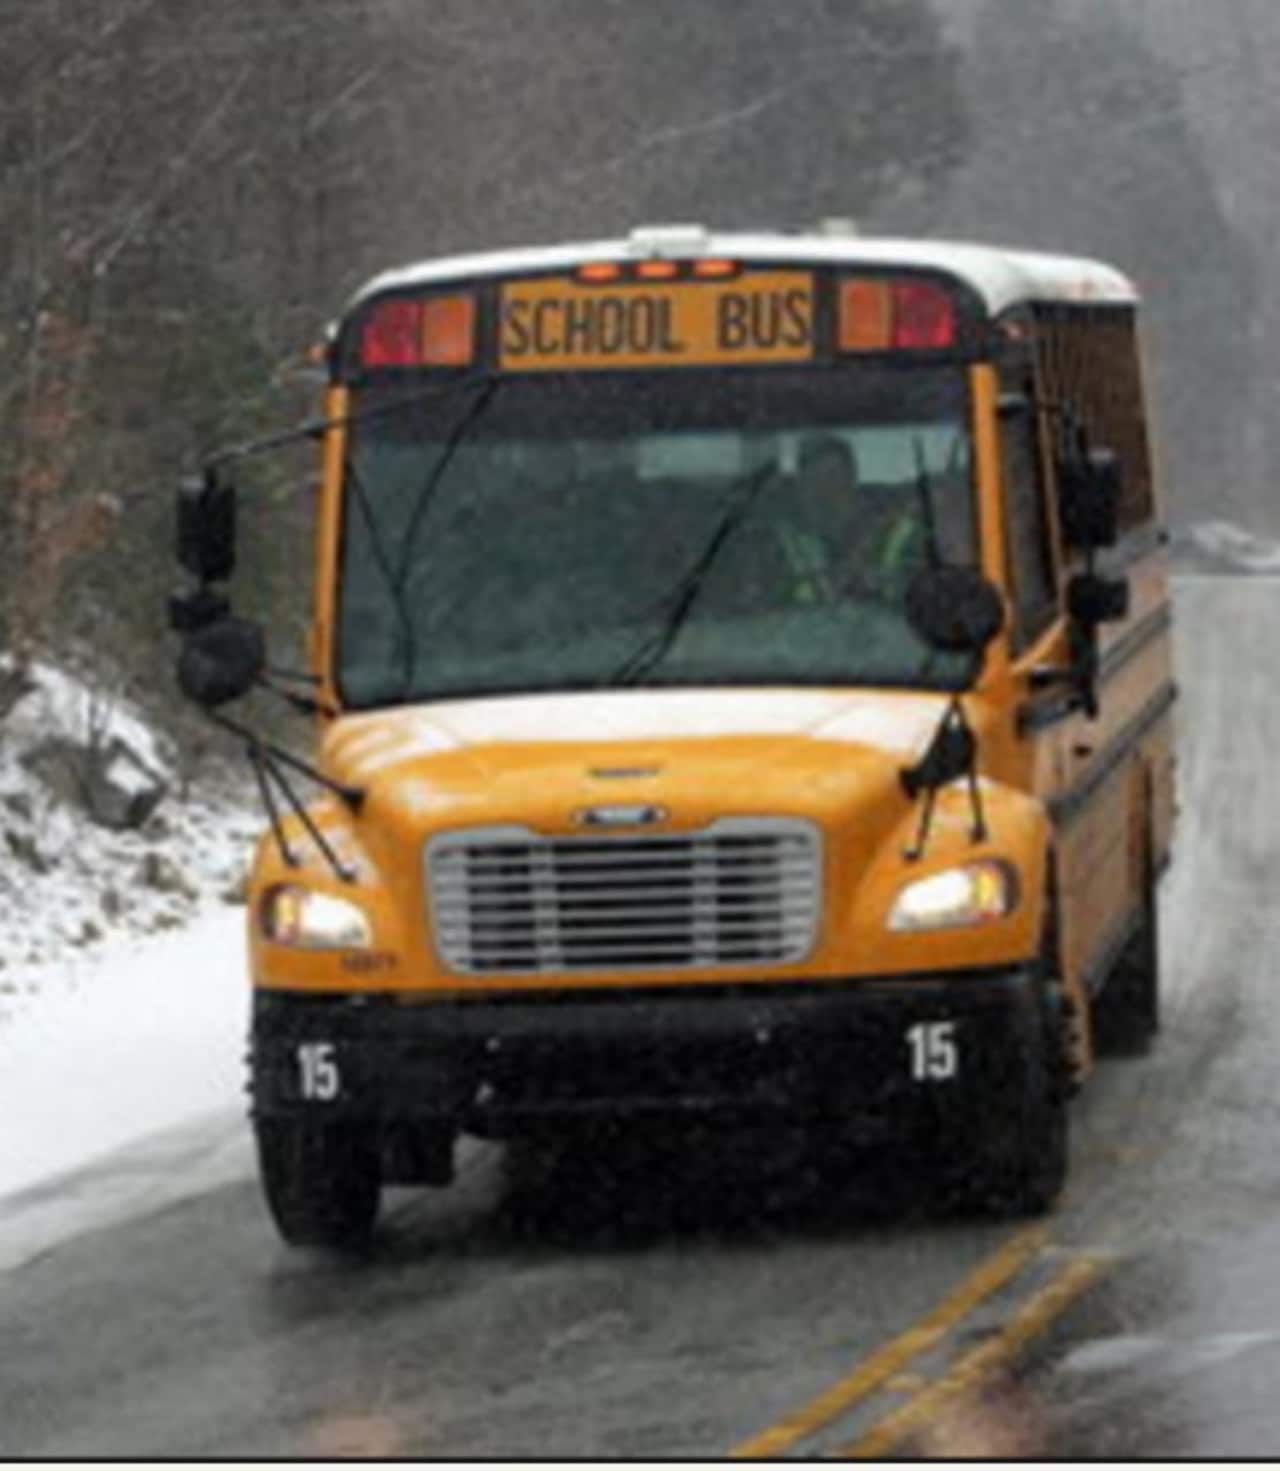 The following school districts have announced delayed openings or closures for Friday, March 2 due to the Nor'easter moving through the area.